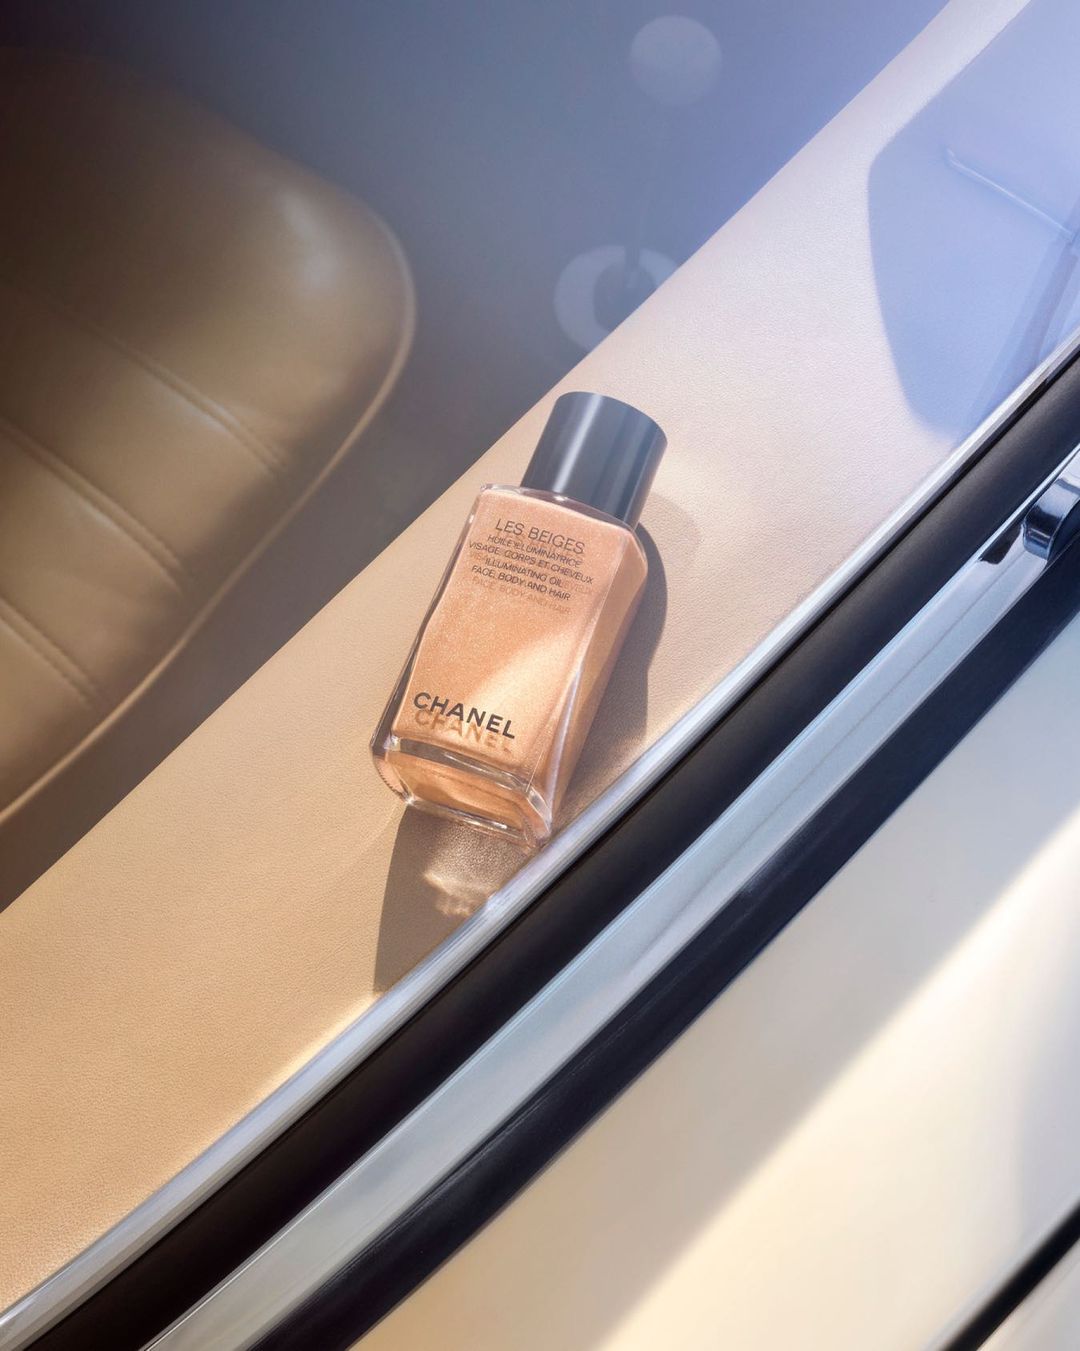 image of a bottle of chanel liquid bronzer